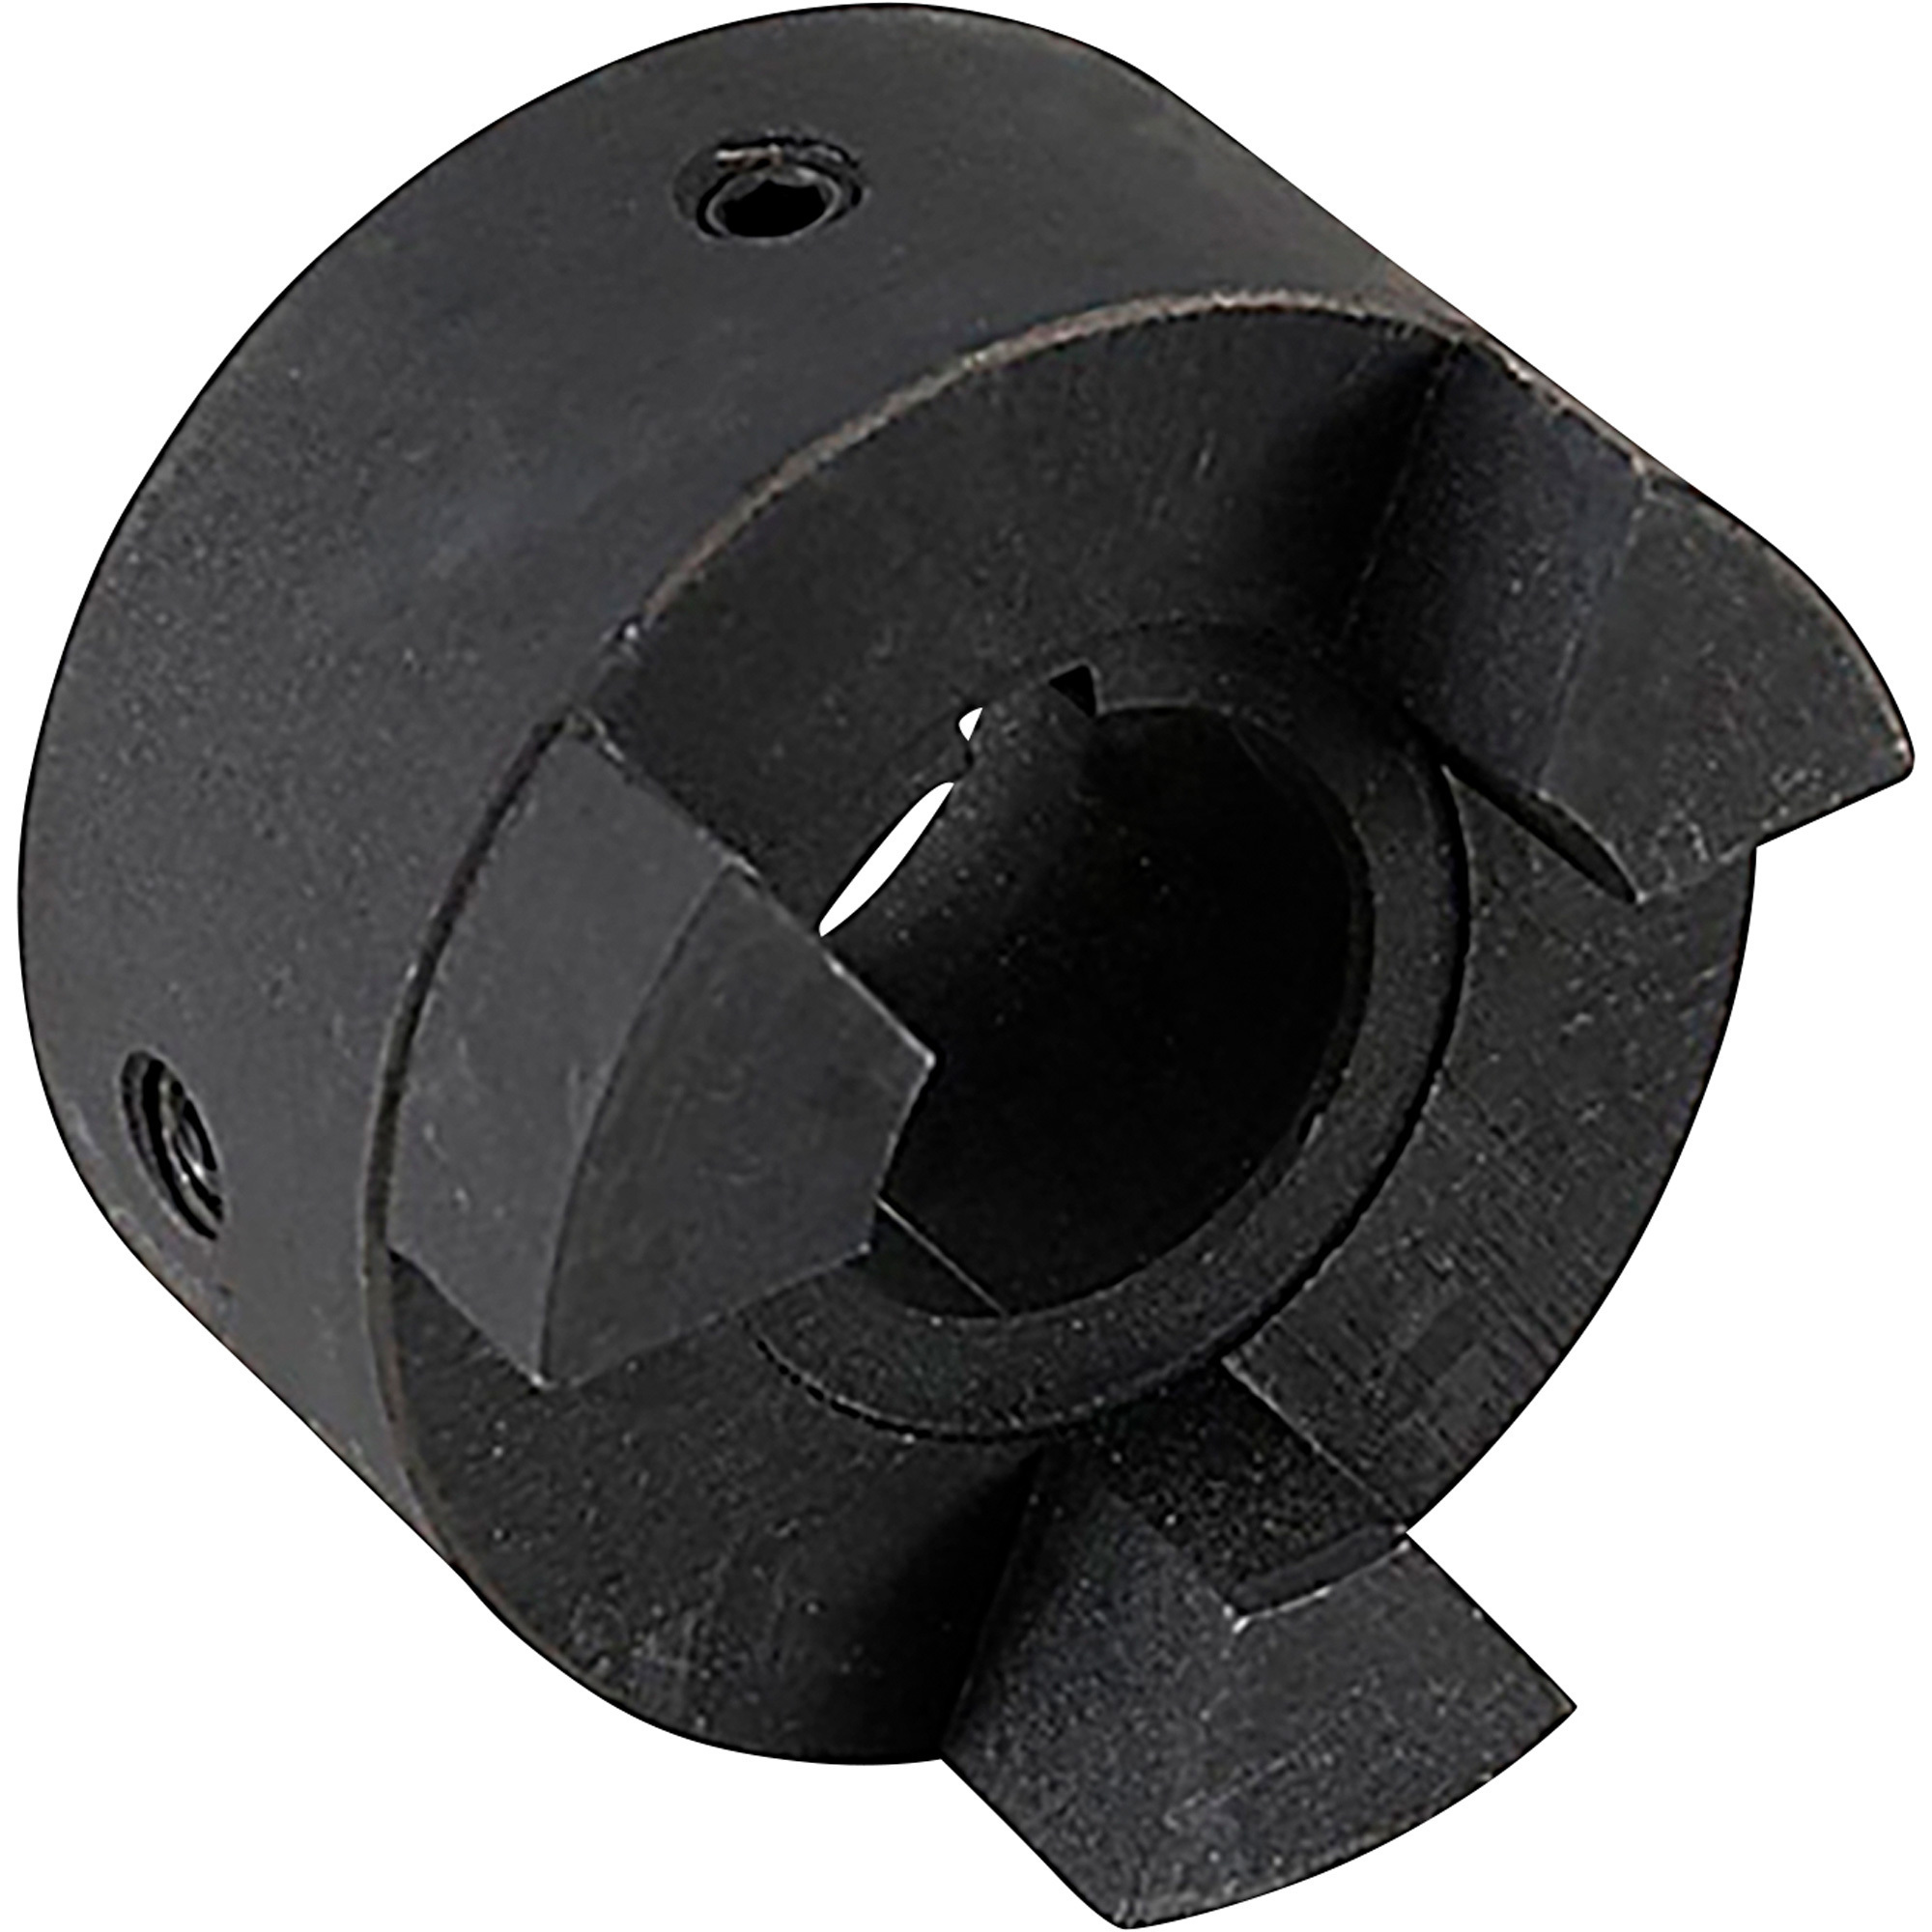 Concentric Standard Coupling, 5/8Inch Size, Model C-LO95-B